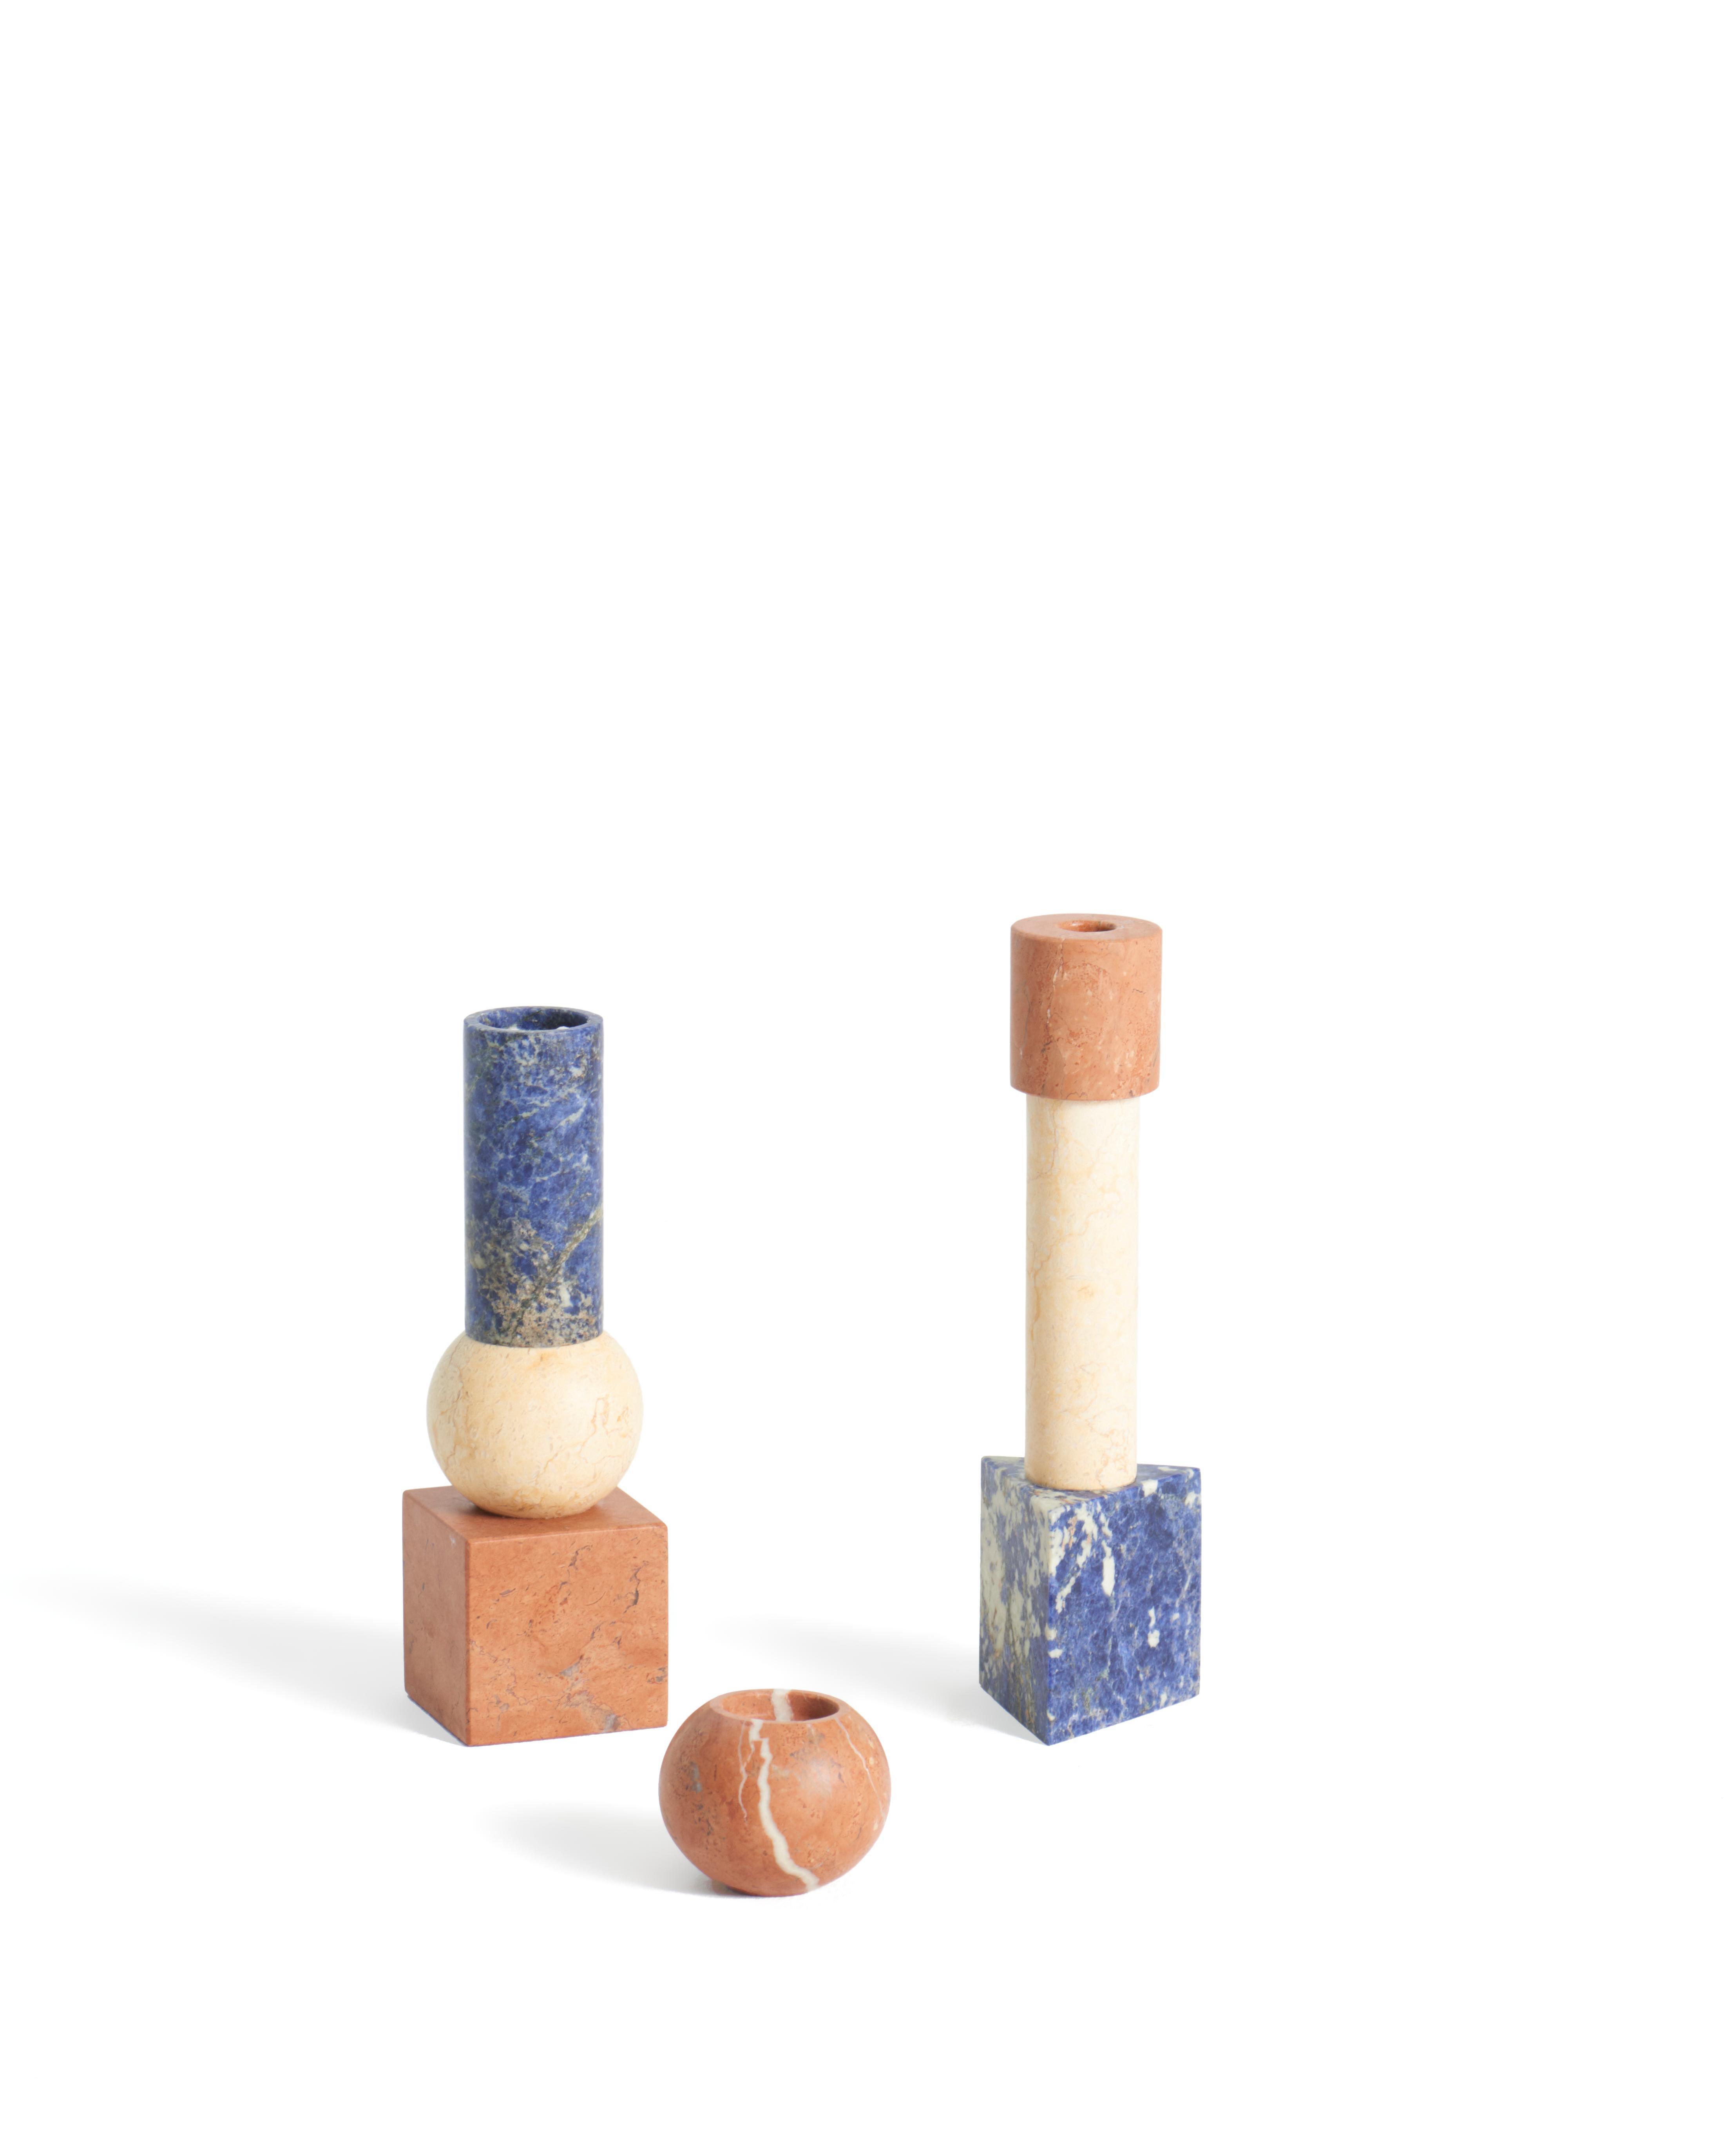 Candleholder in red alicante, Blu Sodalite and Egyptian yellow marbles.
Geometrical way of life
A hundred years and it feels like yesterday, a hundred years of a school that changed our practice and understanding of design, art and architecture.